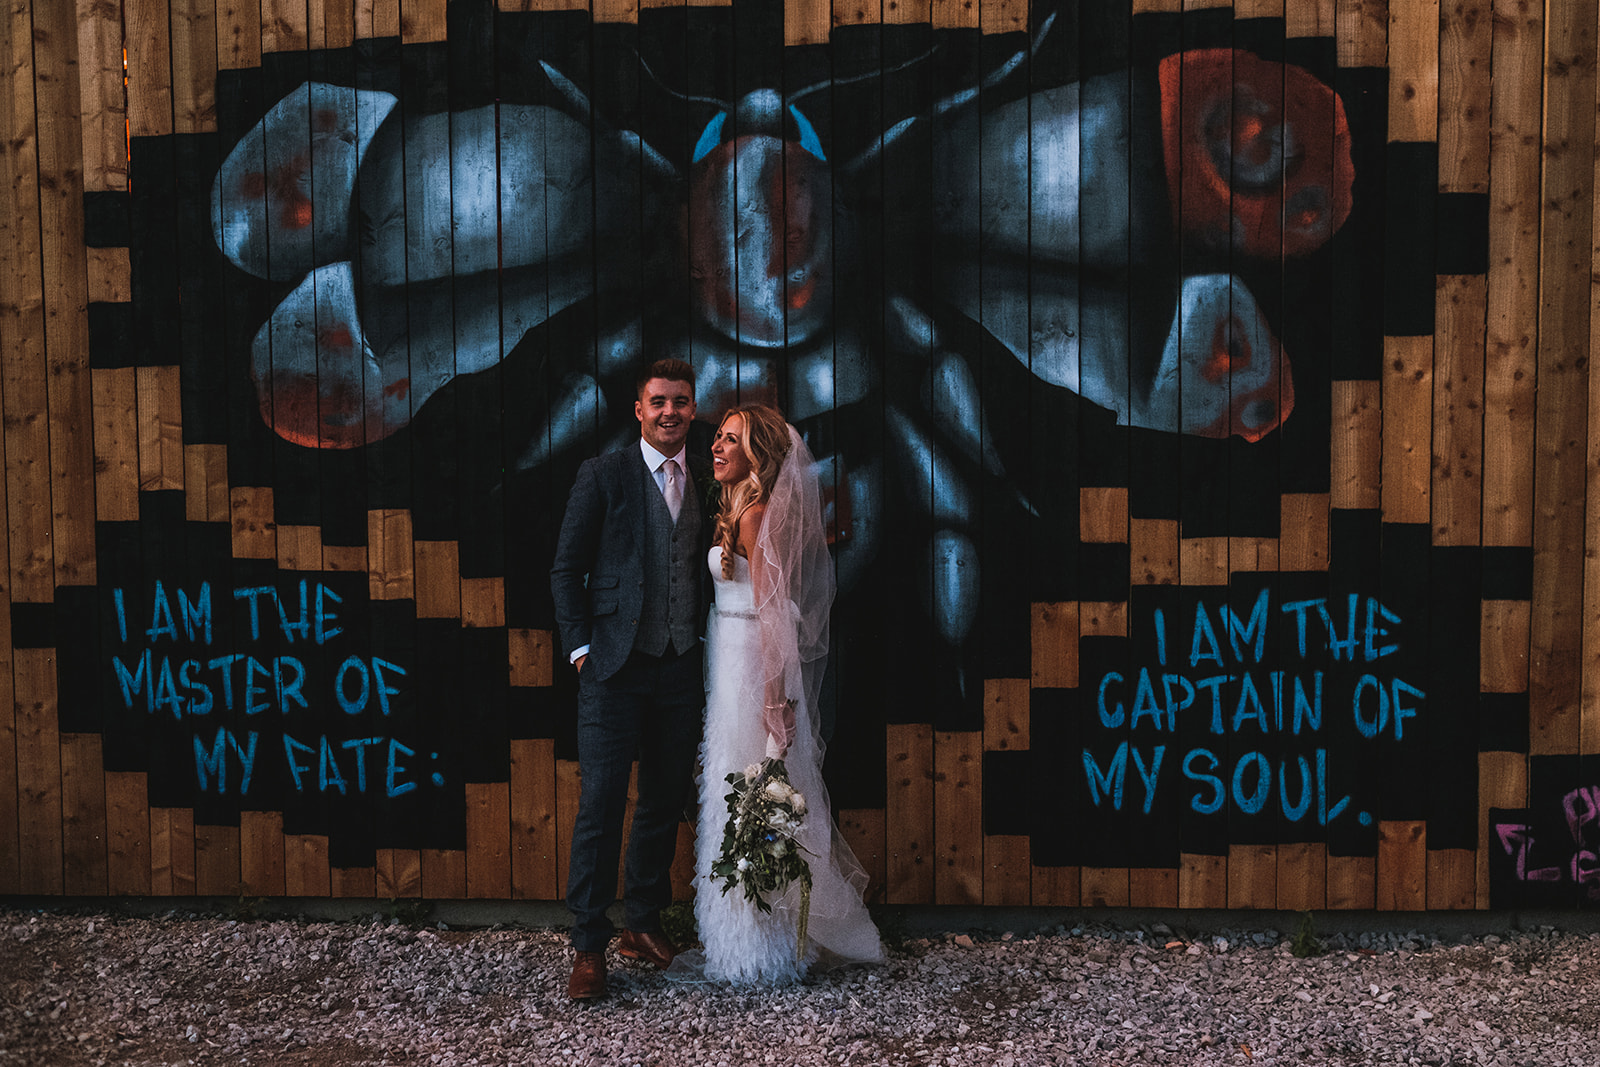 Bride and groom posing in front of graffiti wall.